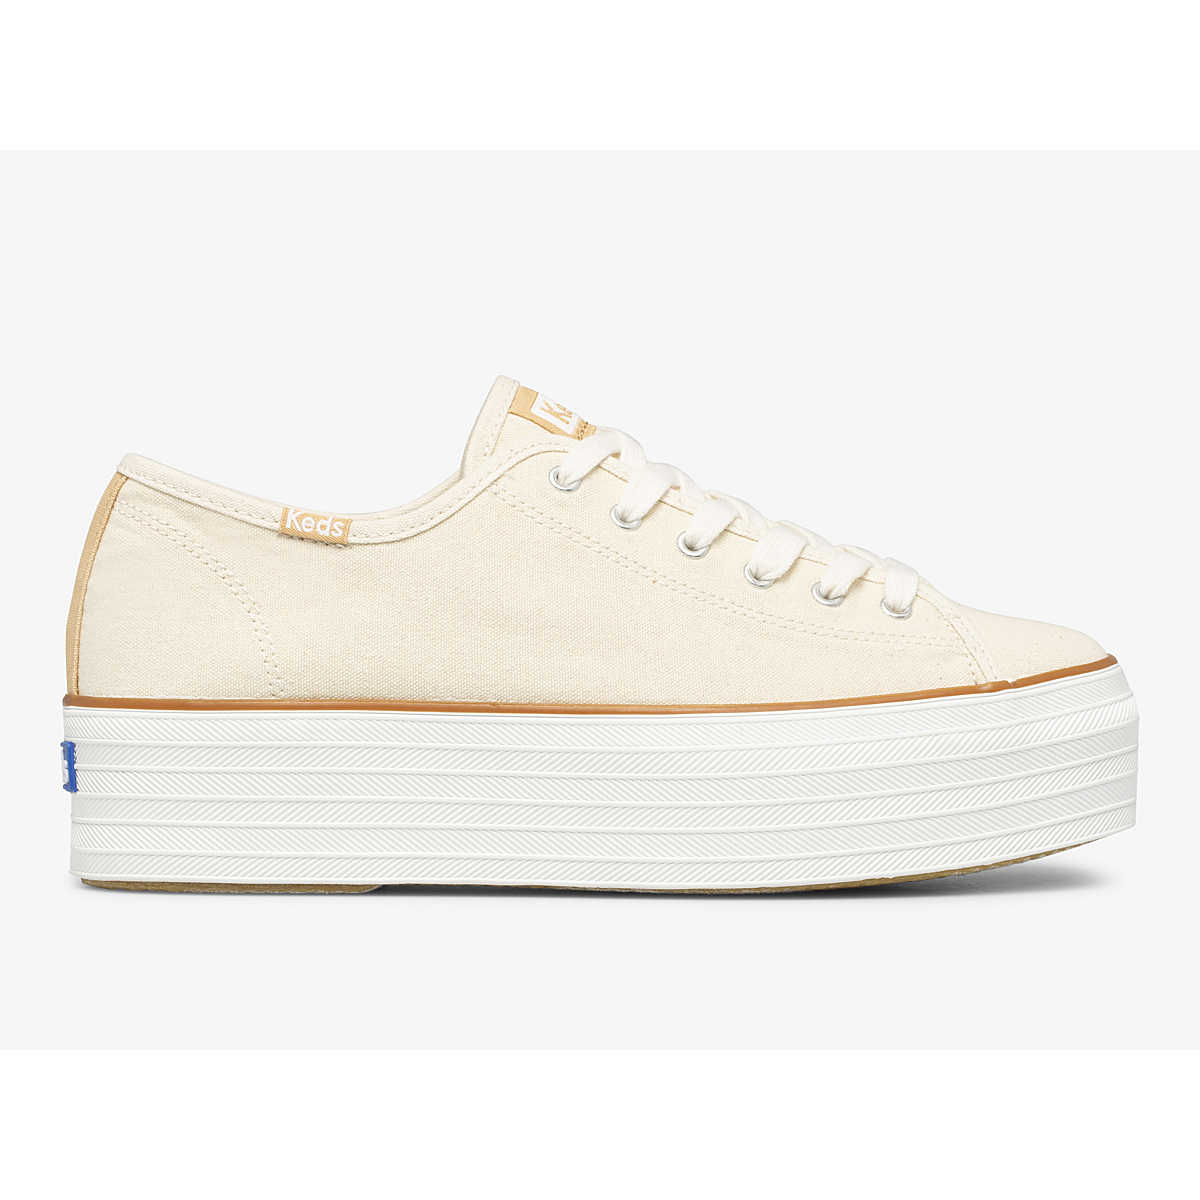 Keds Triple Up Canvas Sneaker. In Cream